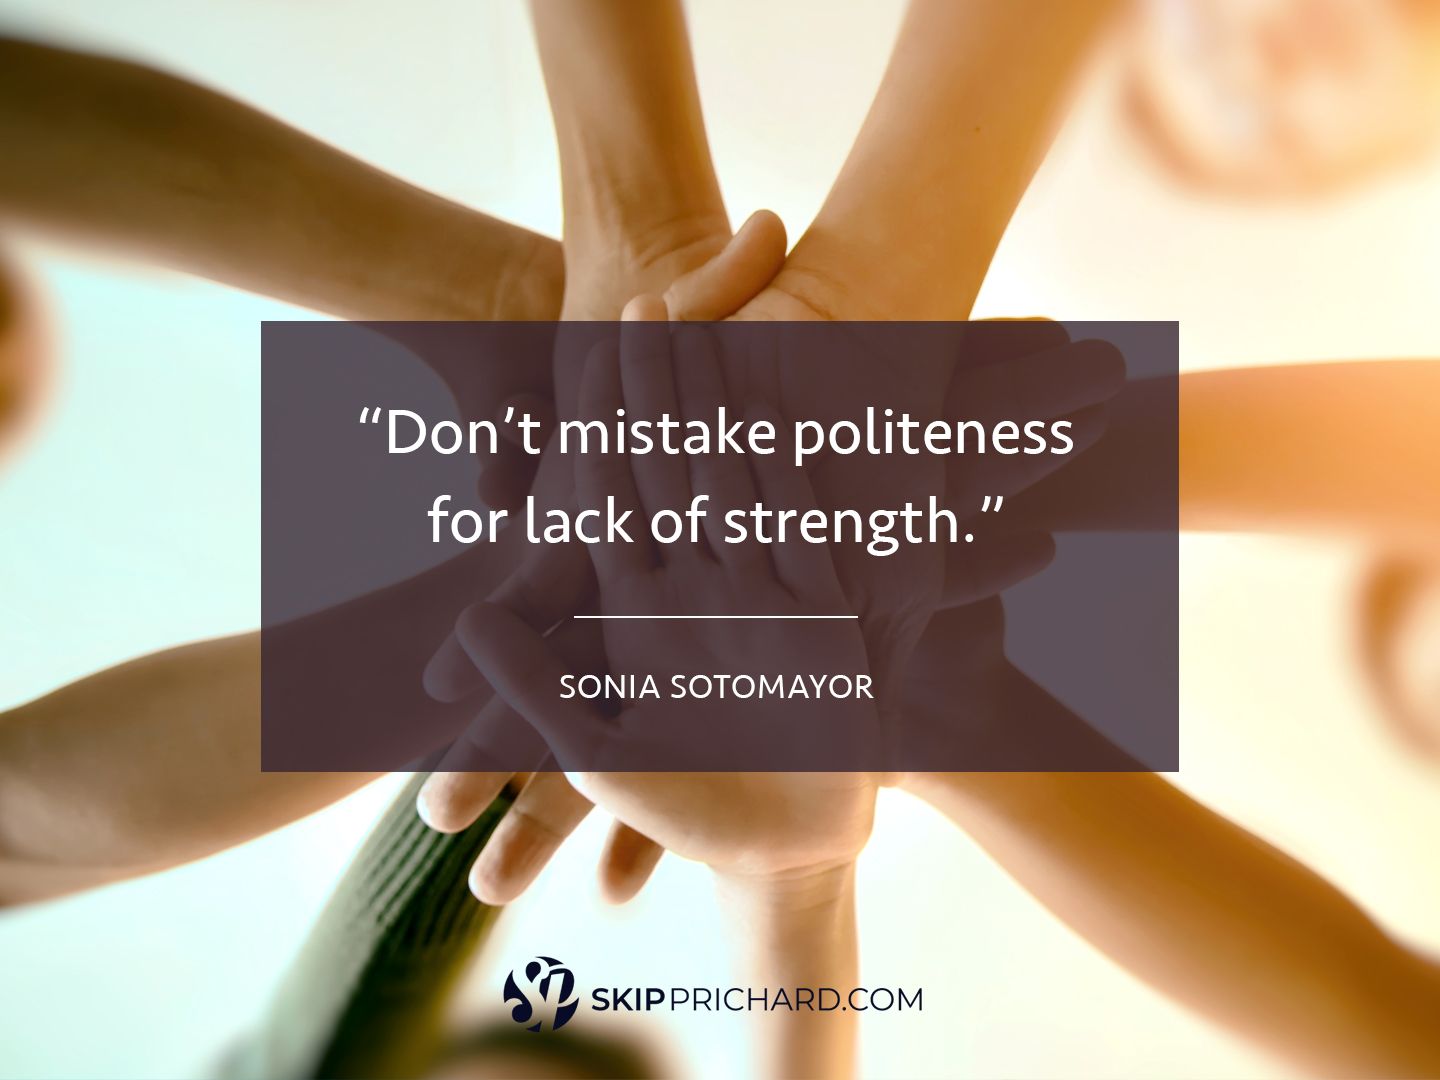 “Don’t mistake politeness for lack of strength.”